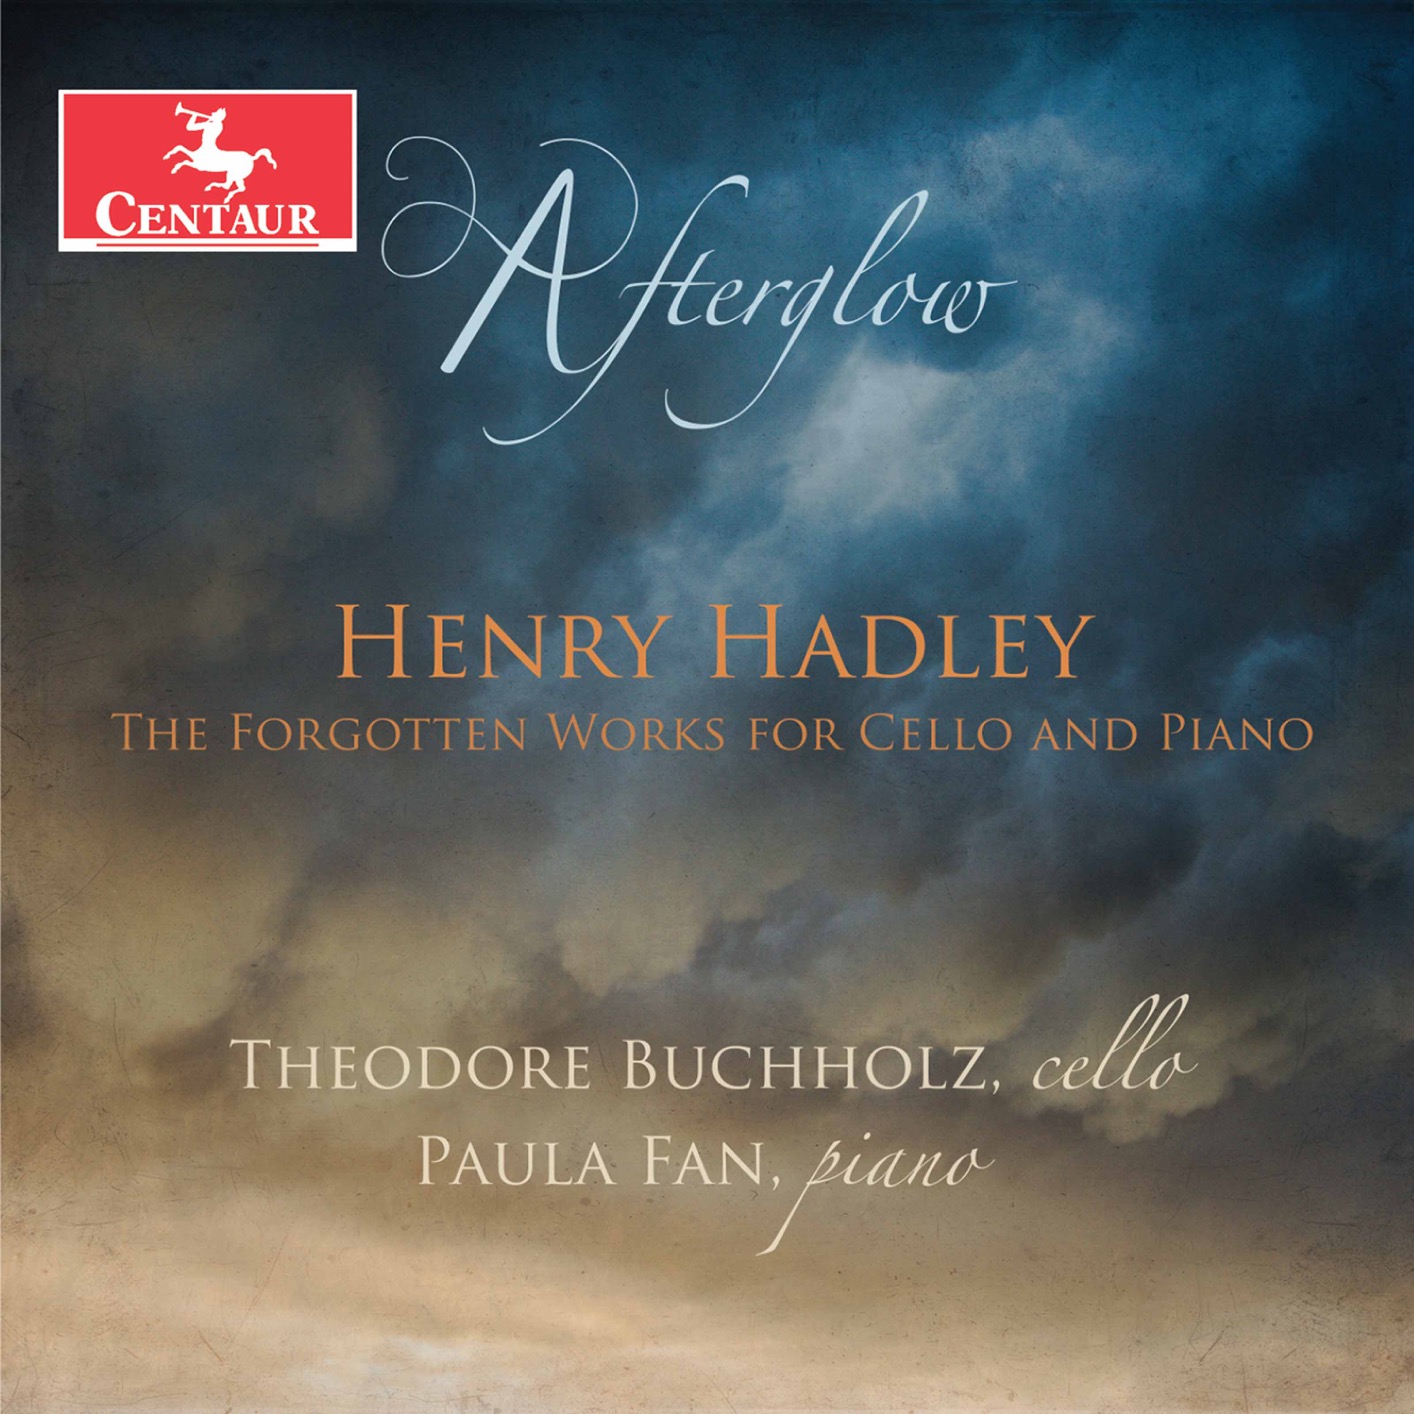 Theodore Buchholz - Afterglow - The Forgotten Works for Cello & Piano by Henry Hadley (2020) [FLAC 24bit/96kHz]